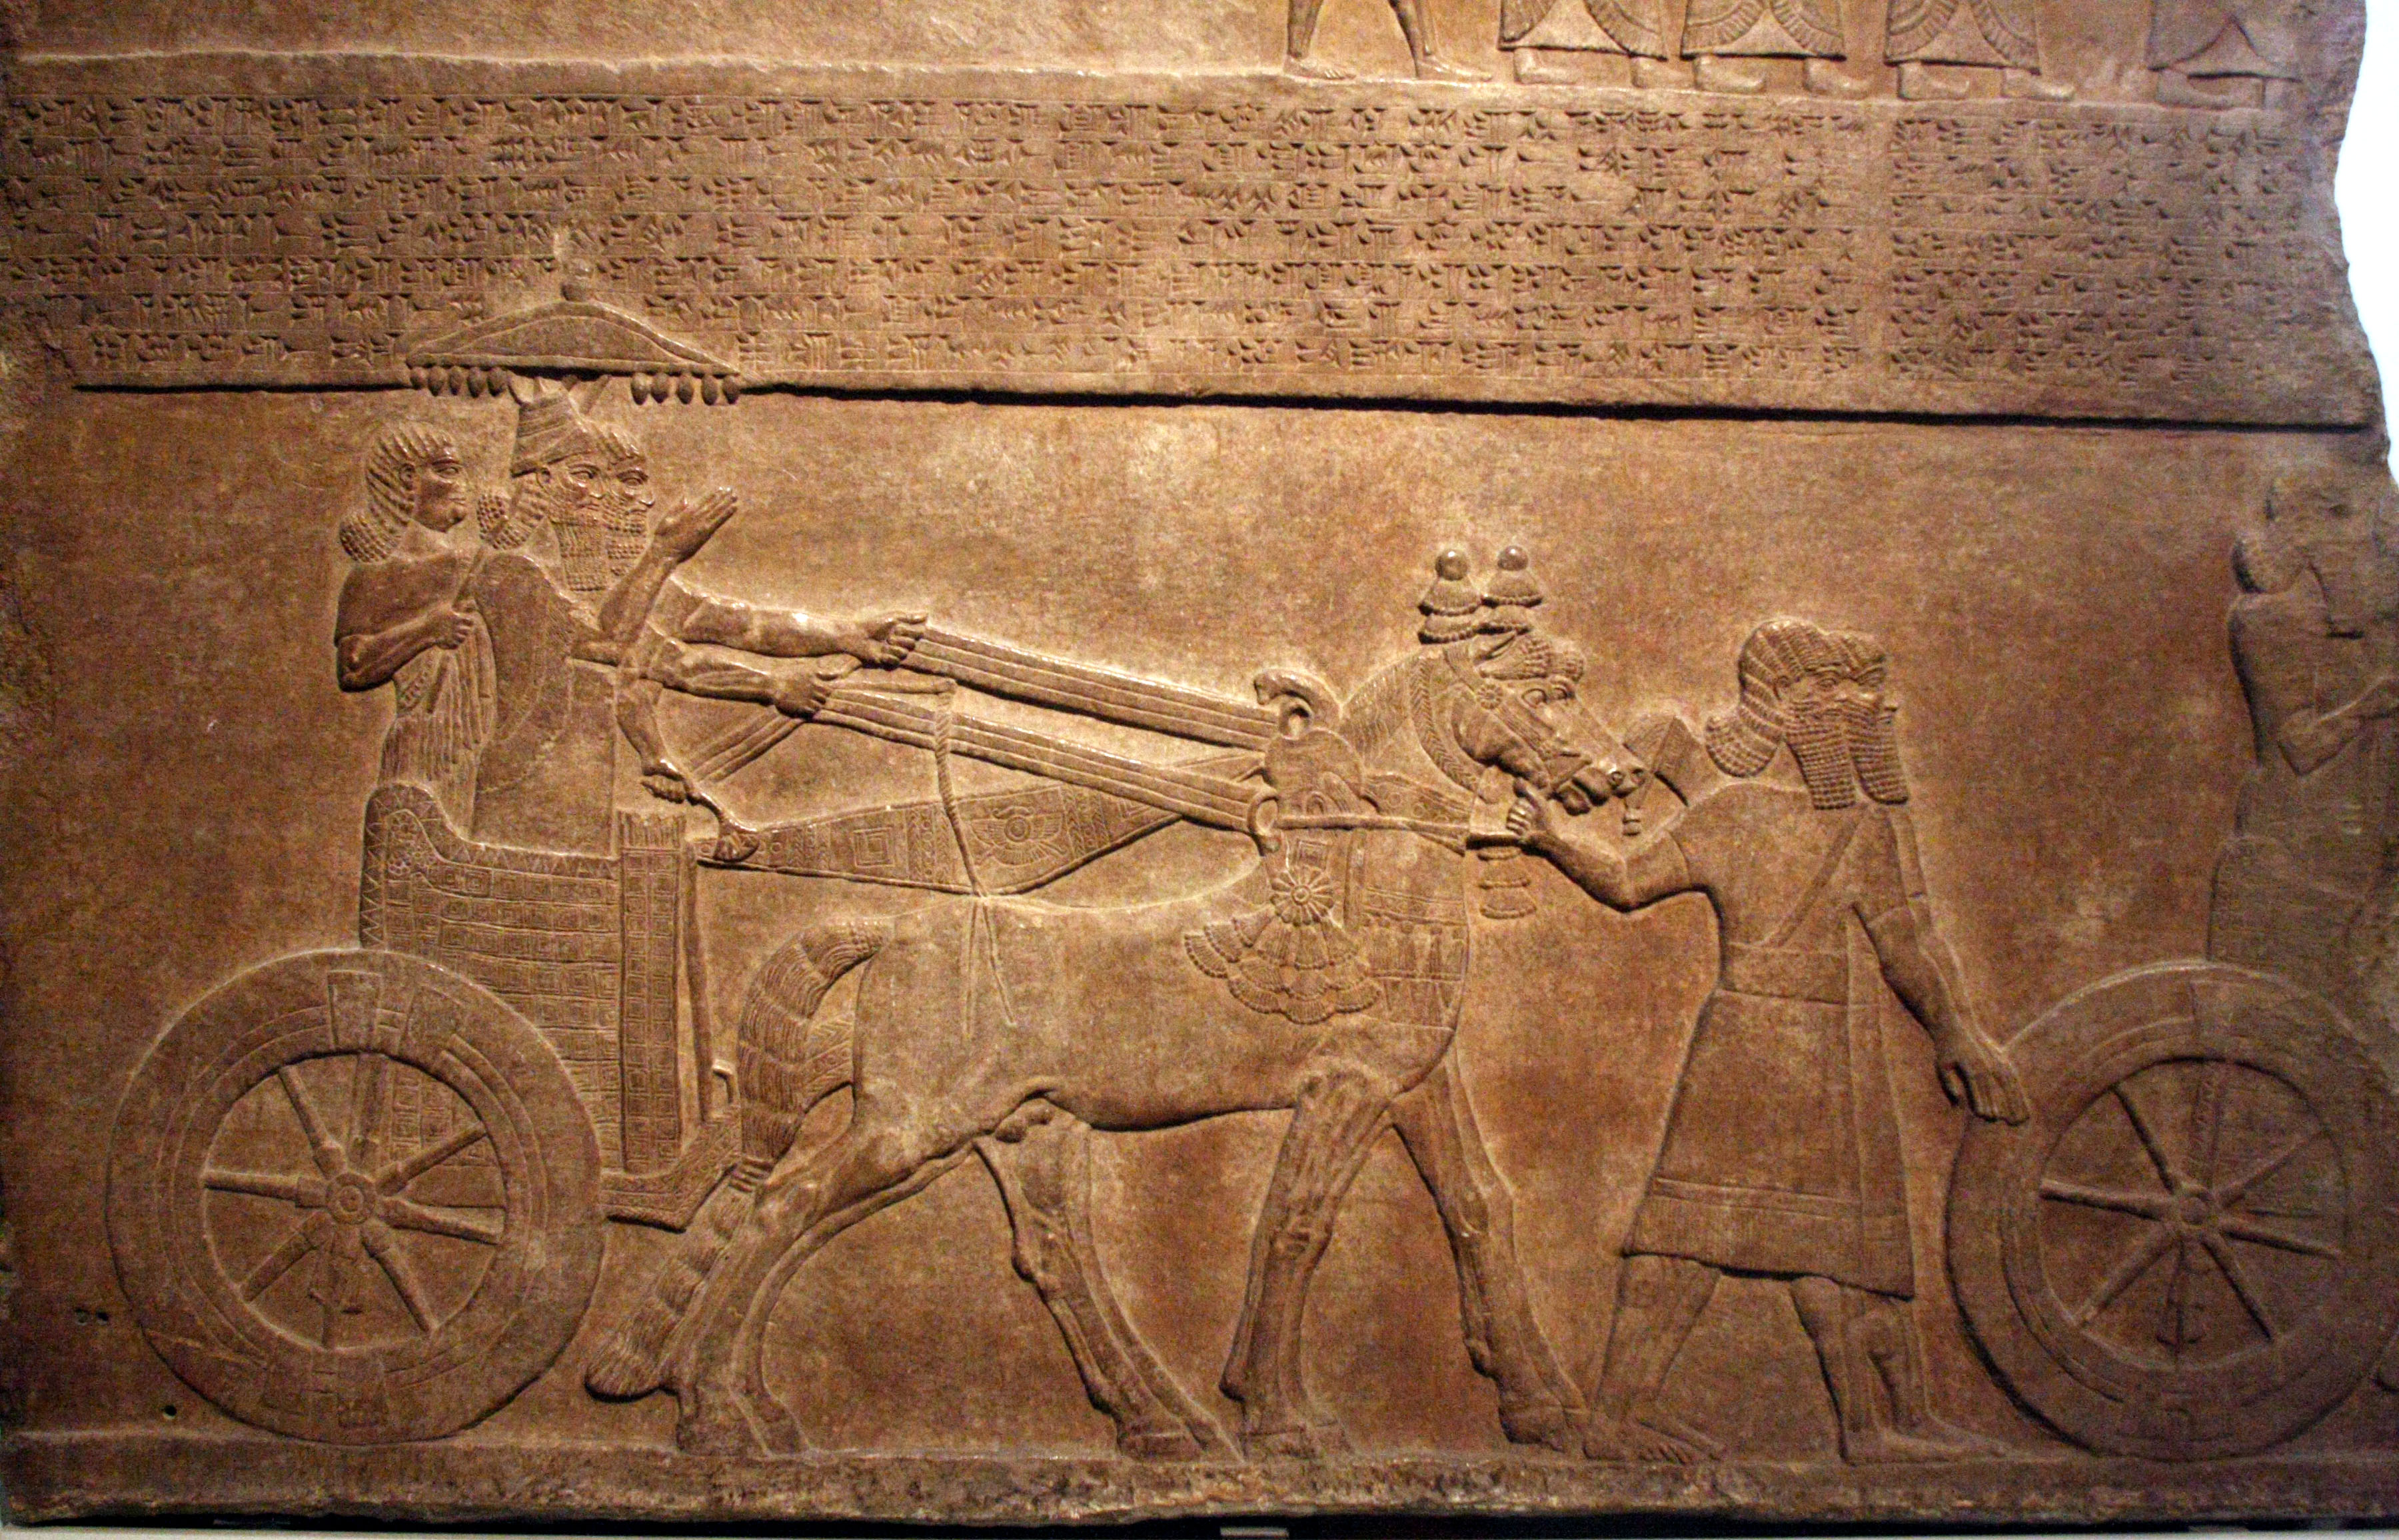 The capture of Astartu and the king in his chariot